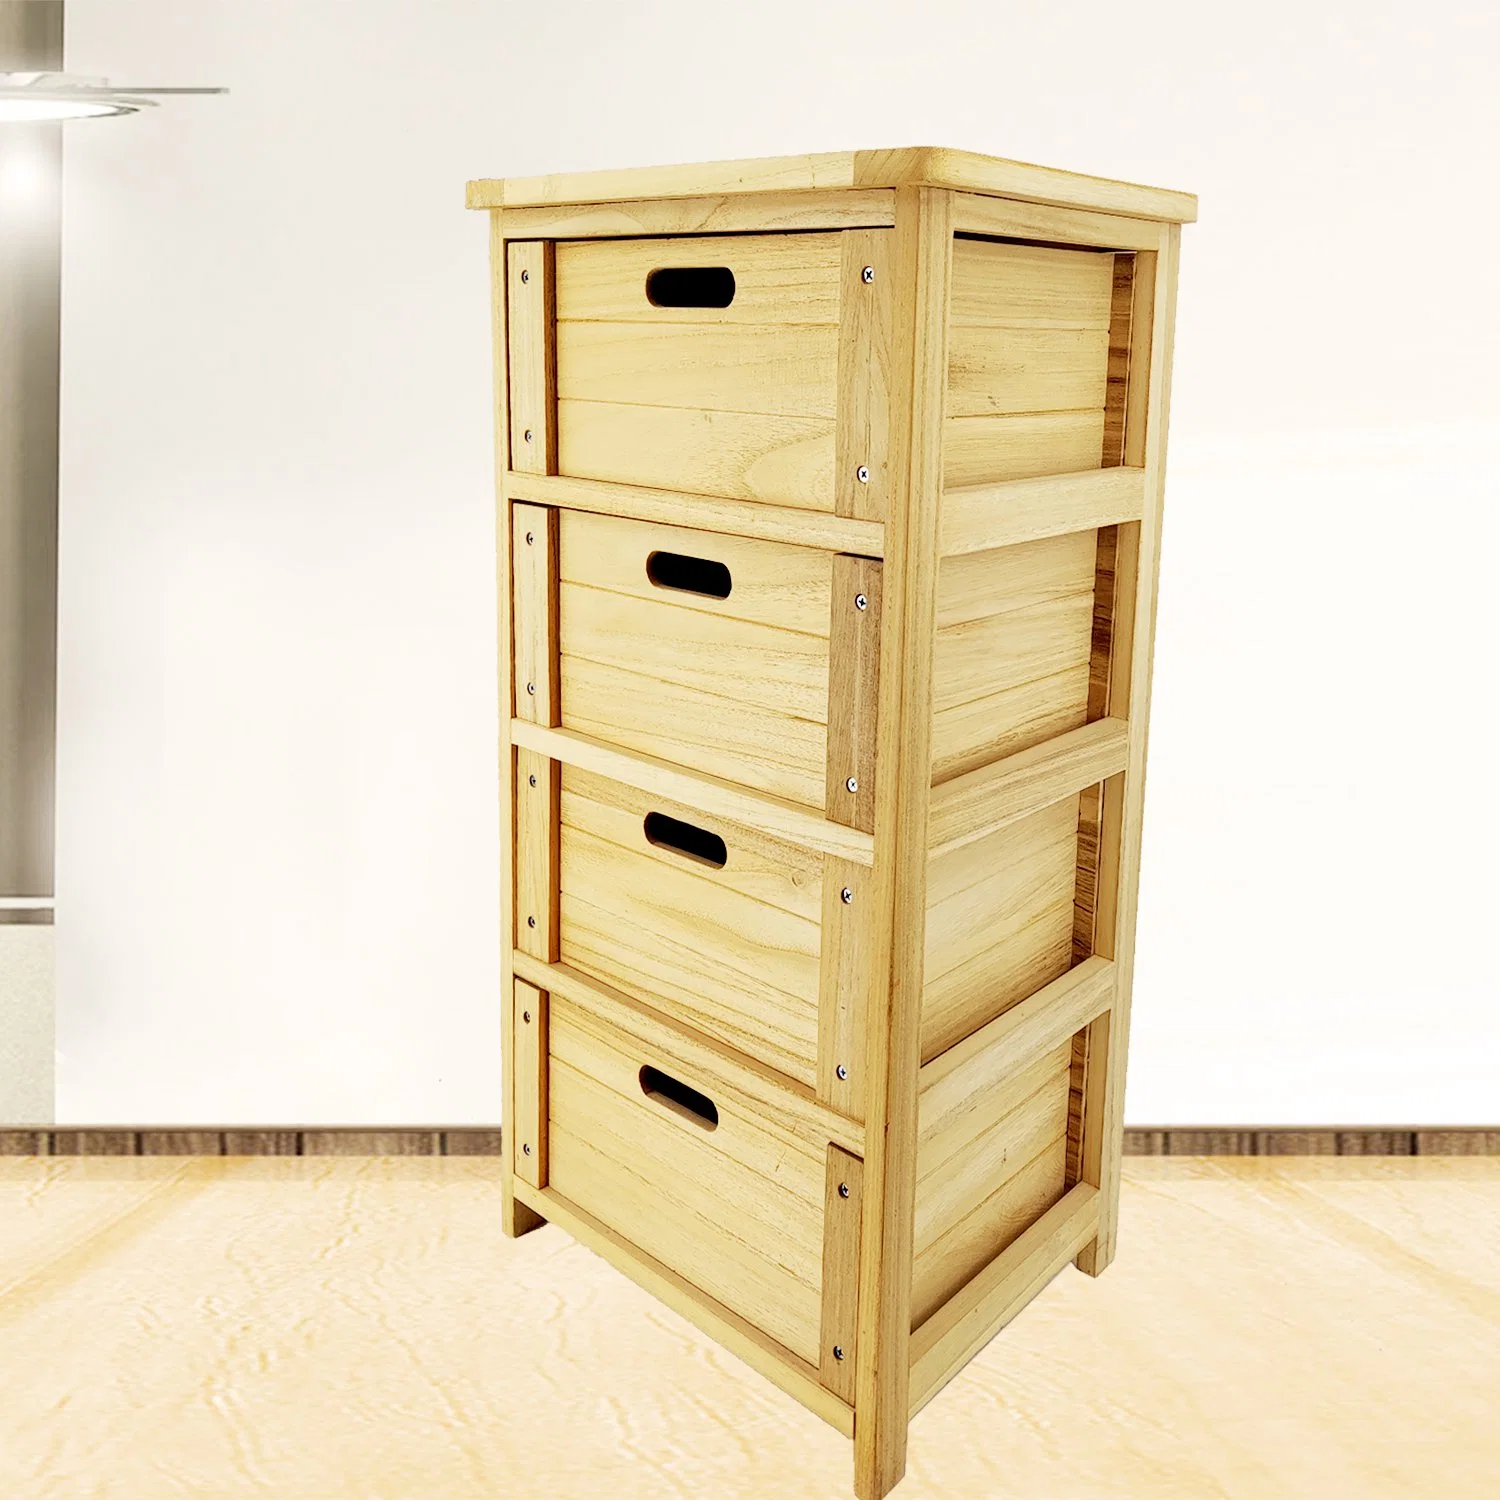 Wooden Storage Cabinets on The Ground